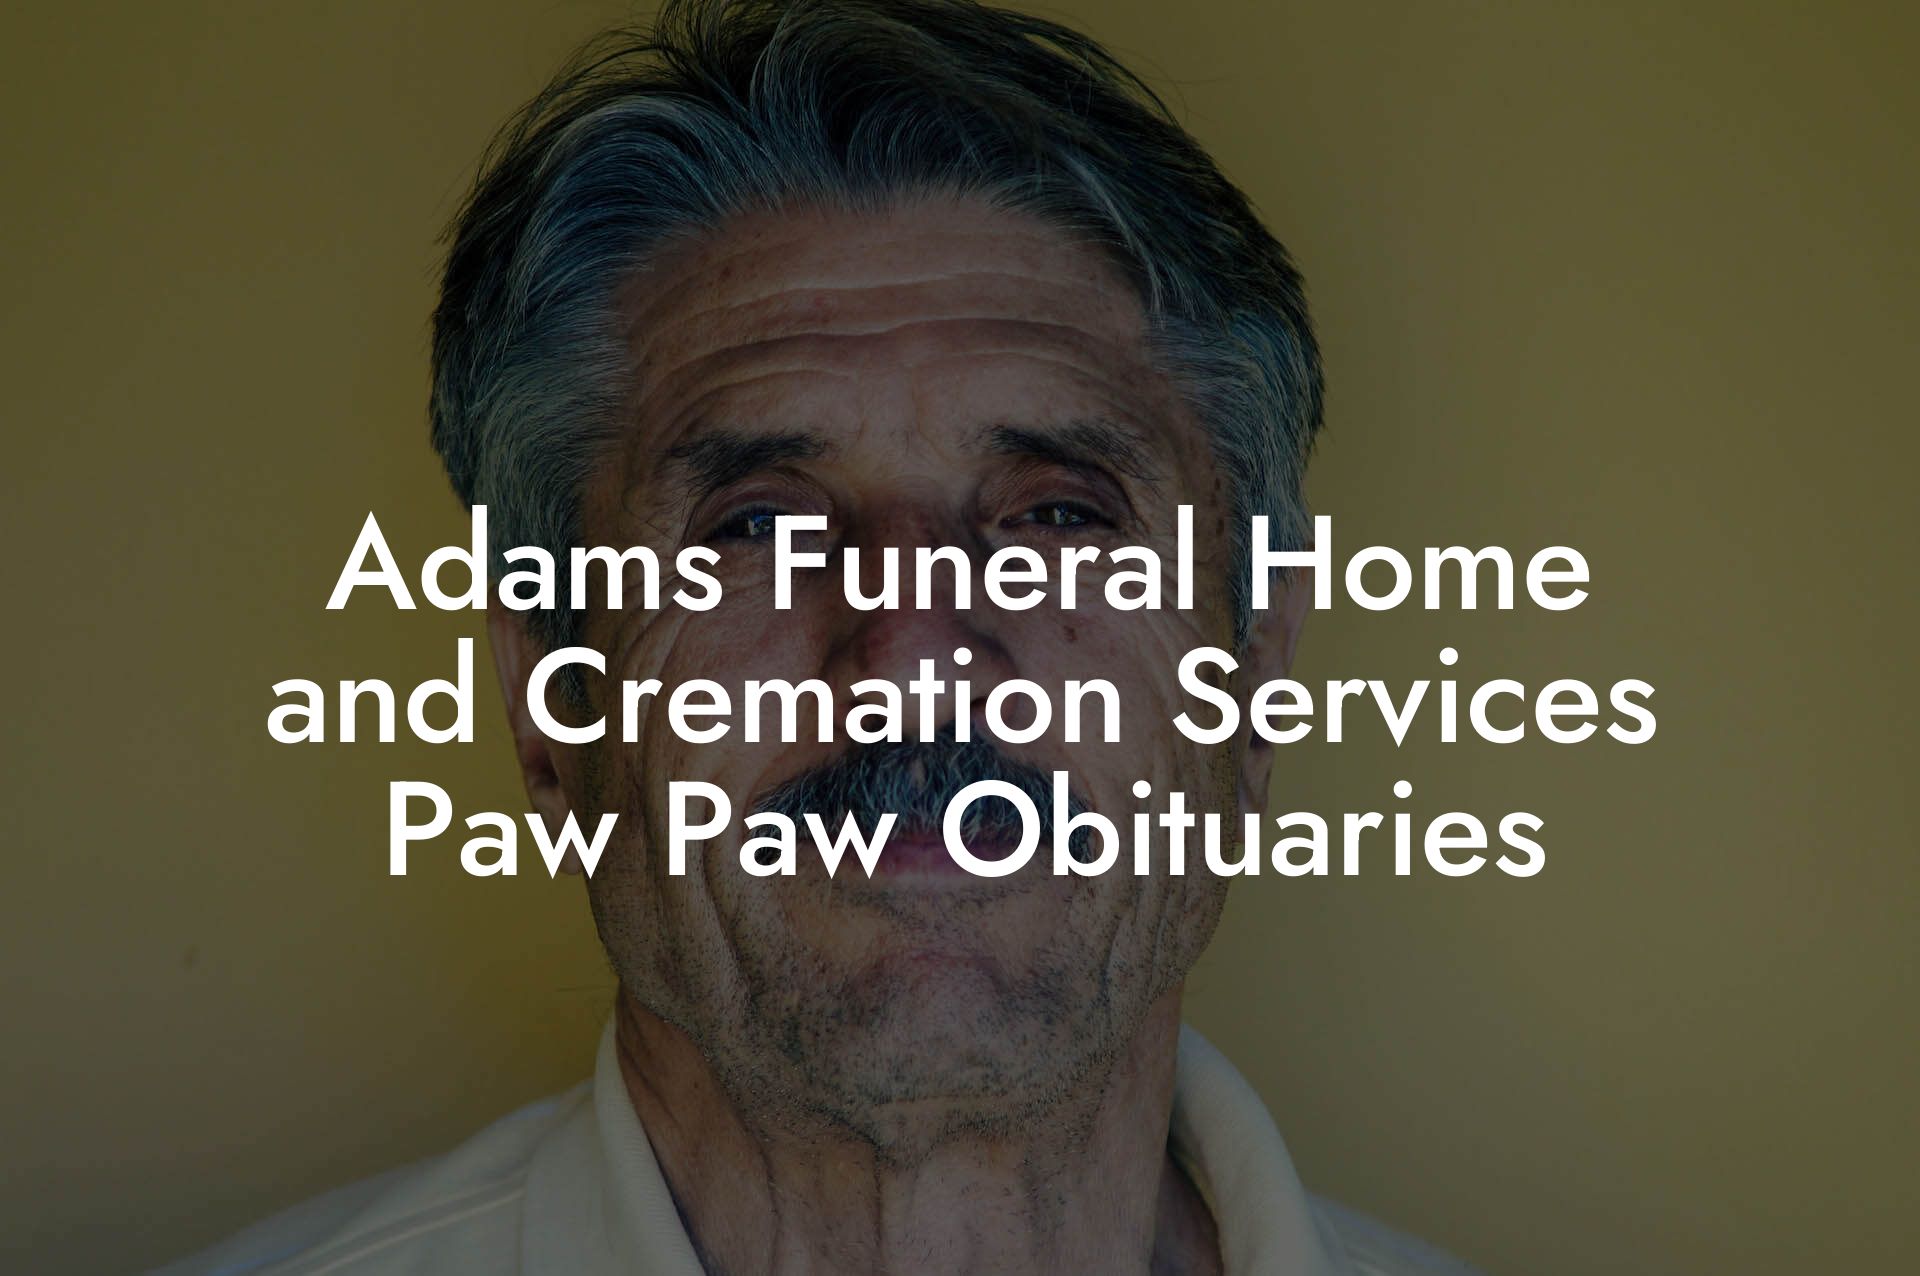 Adams funeral home and cremation services paw paw obituaries